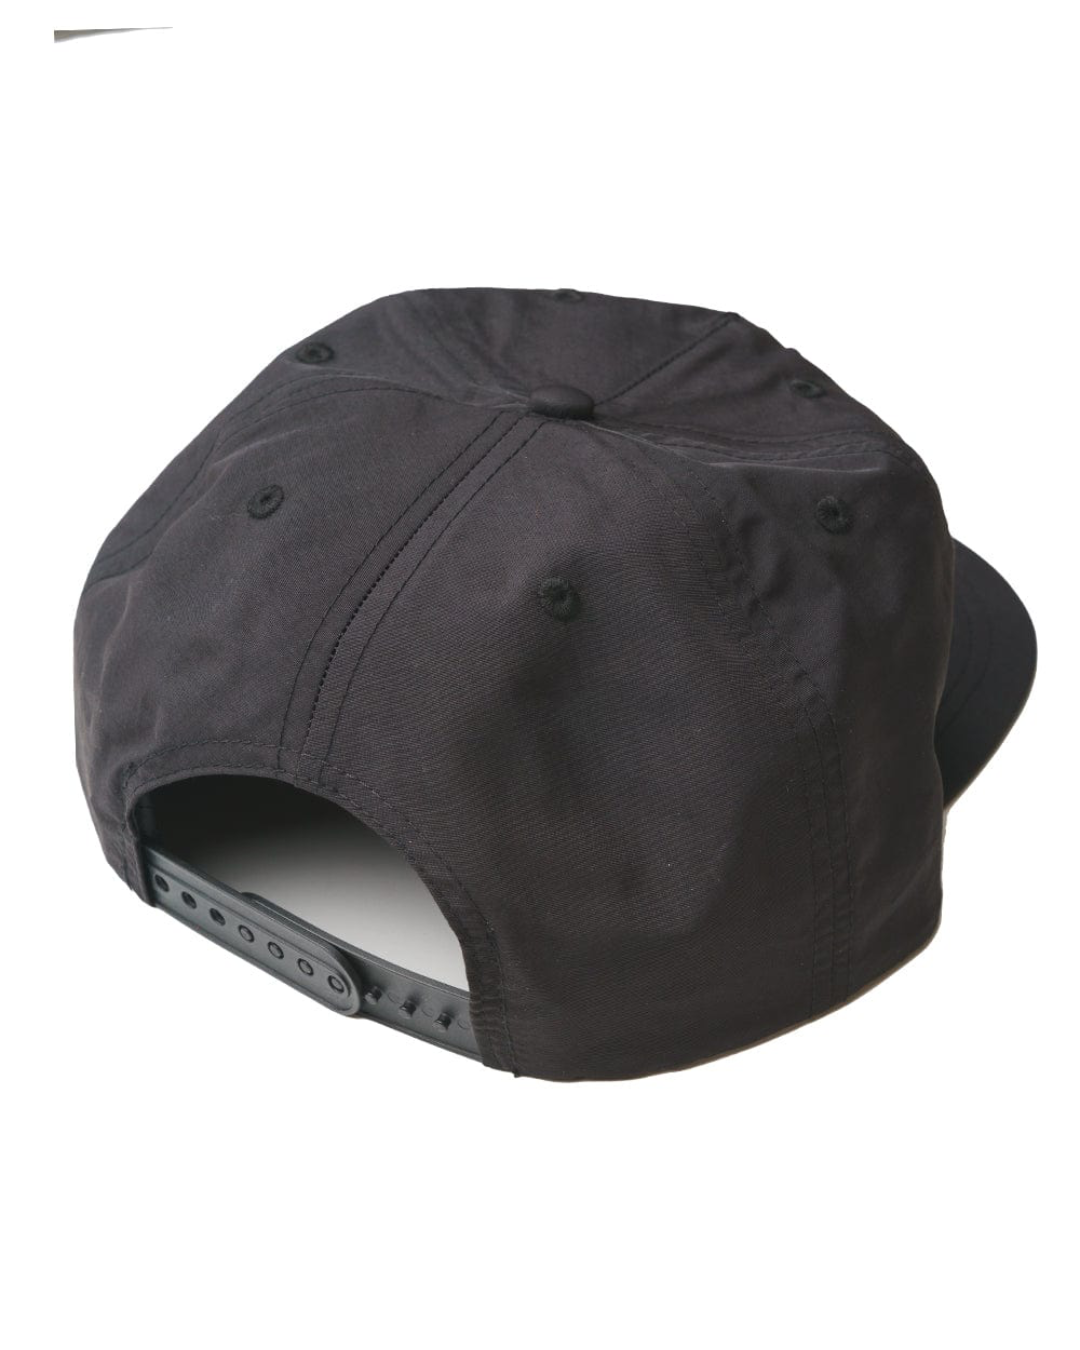 Keep Nature Wild Lone Pine Quick Dry Trail Hat